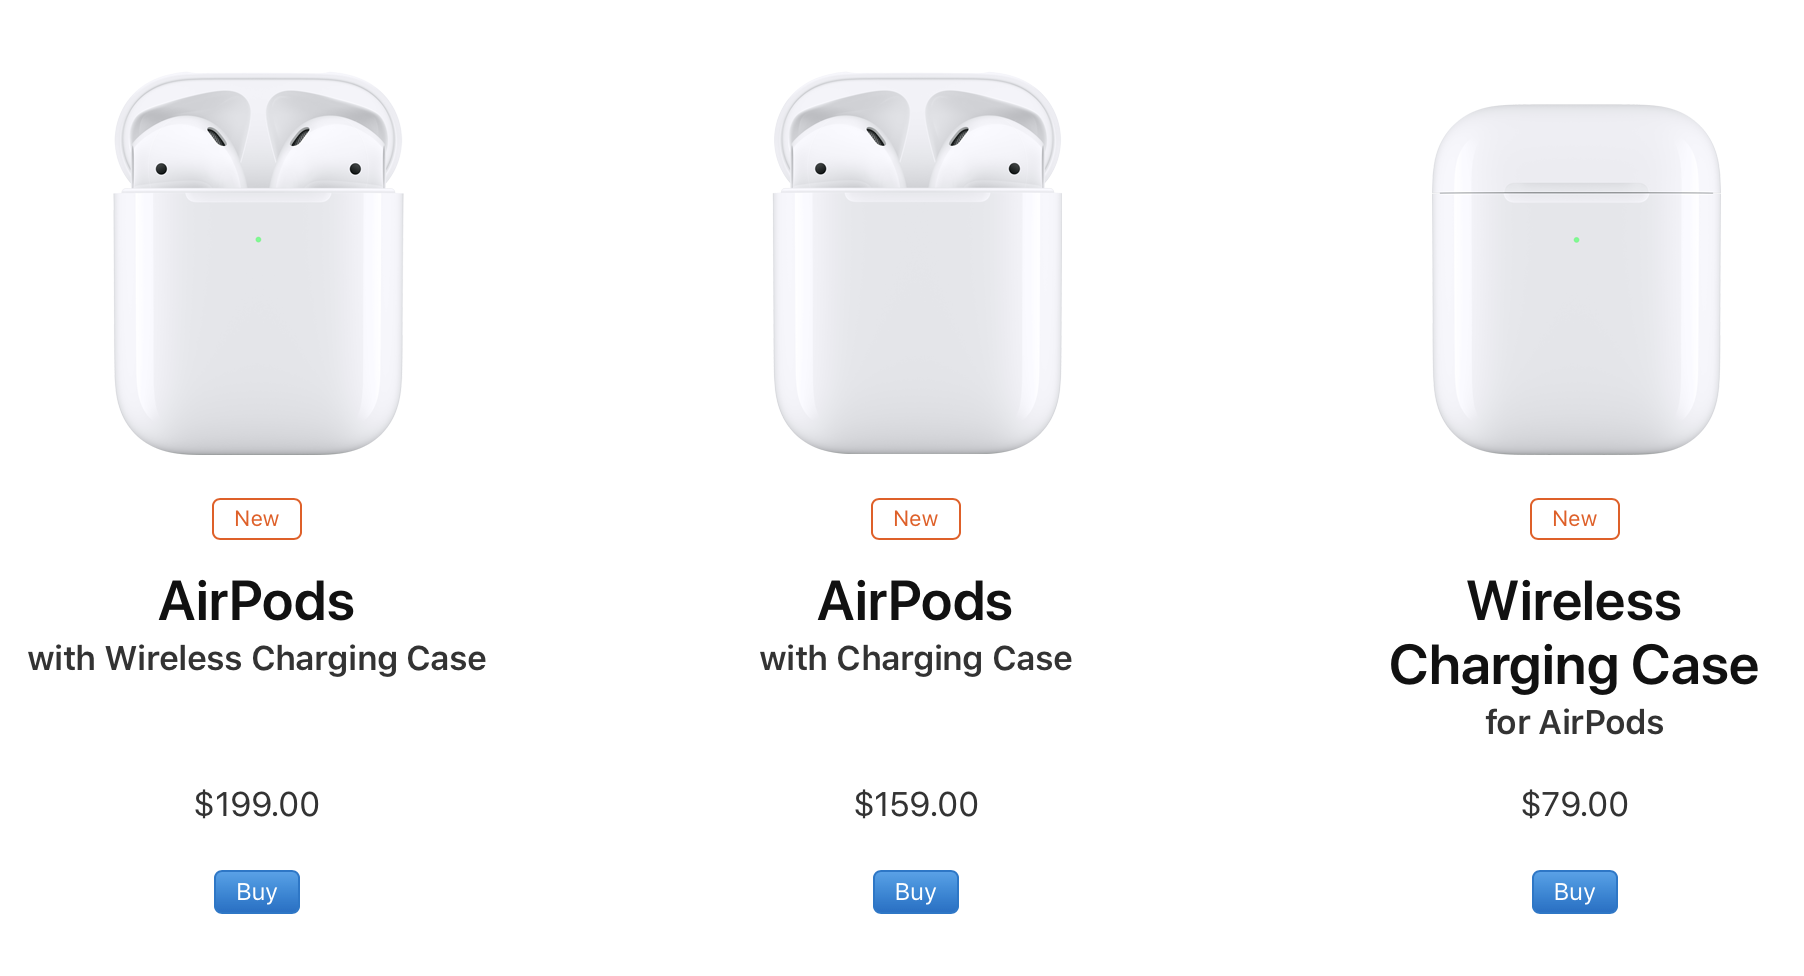 New AirPods released! Apple quietly improves its wireless headphones